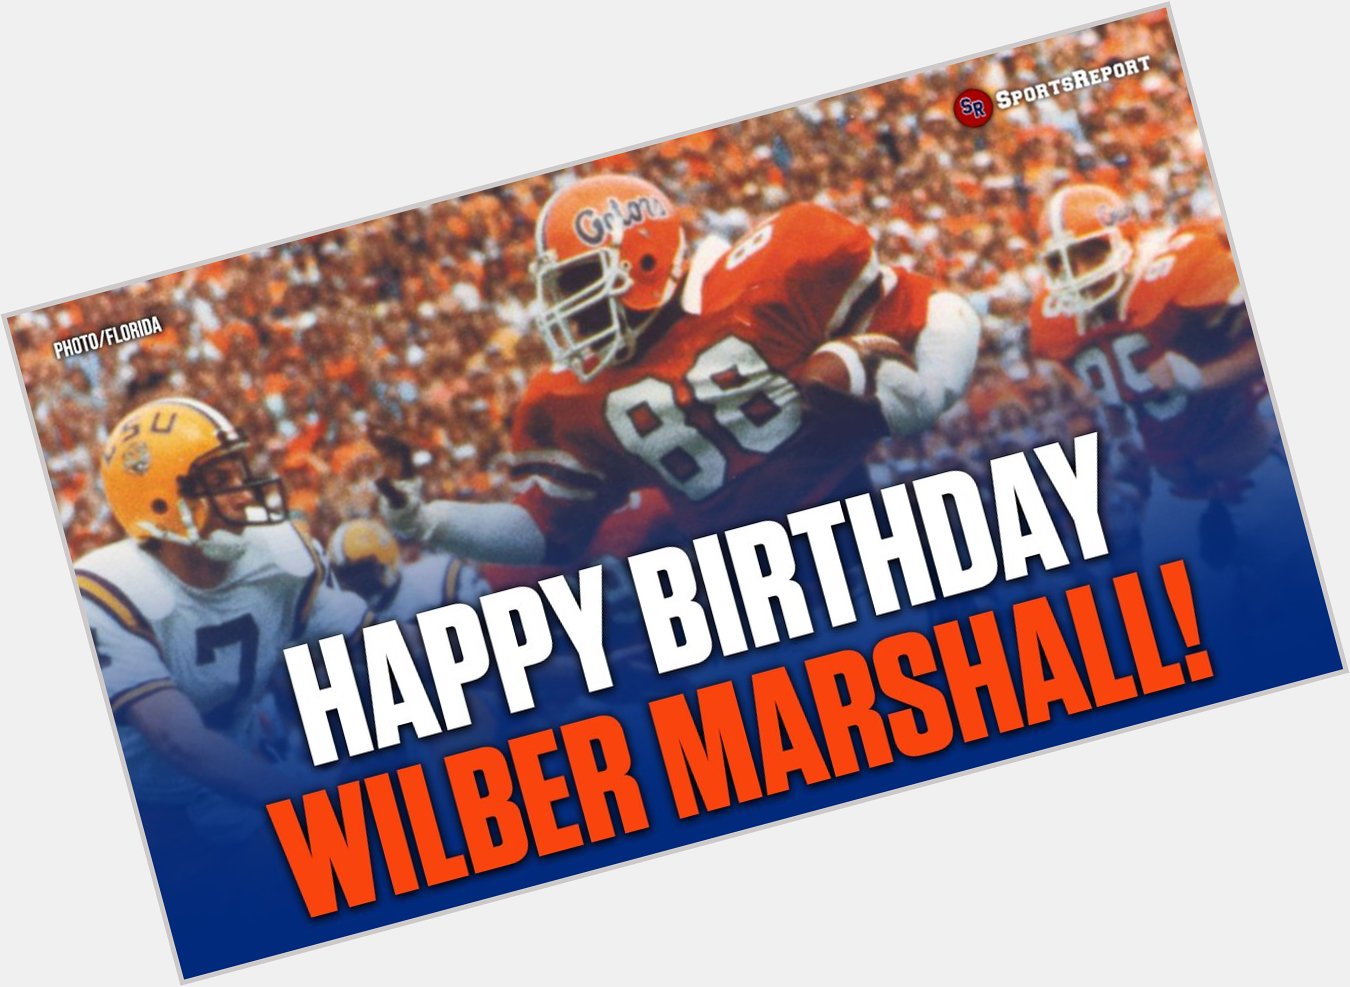  Fans, let\s wish Legend Wilber Marshall a Happy Birthday!! 